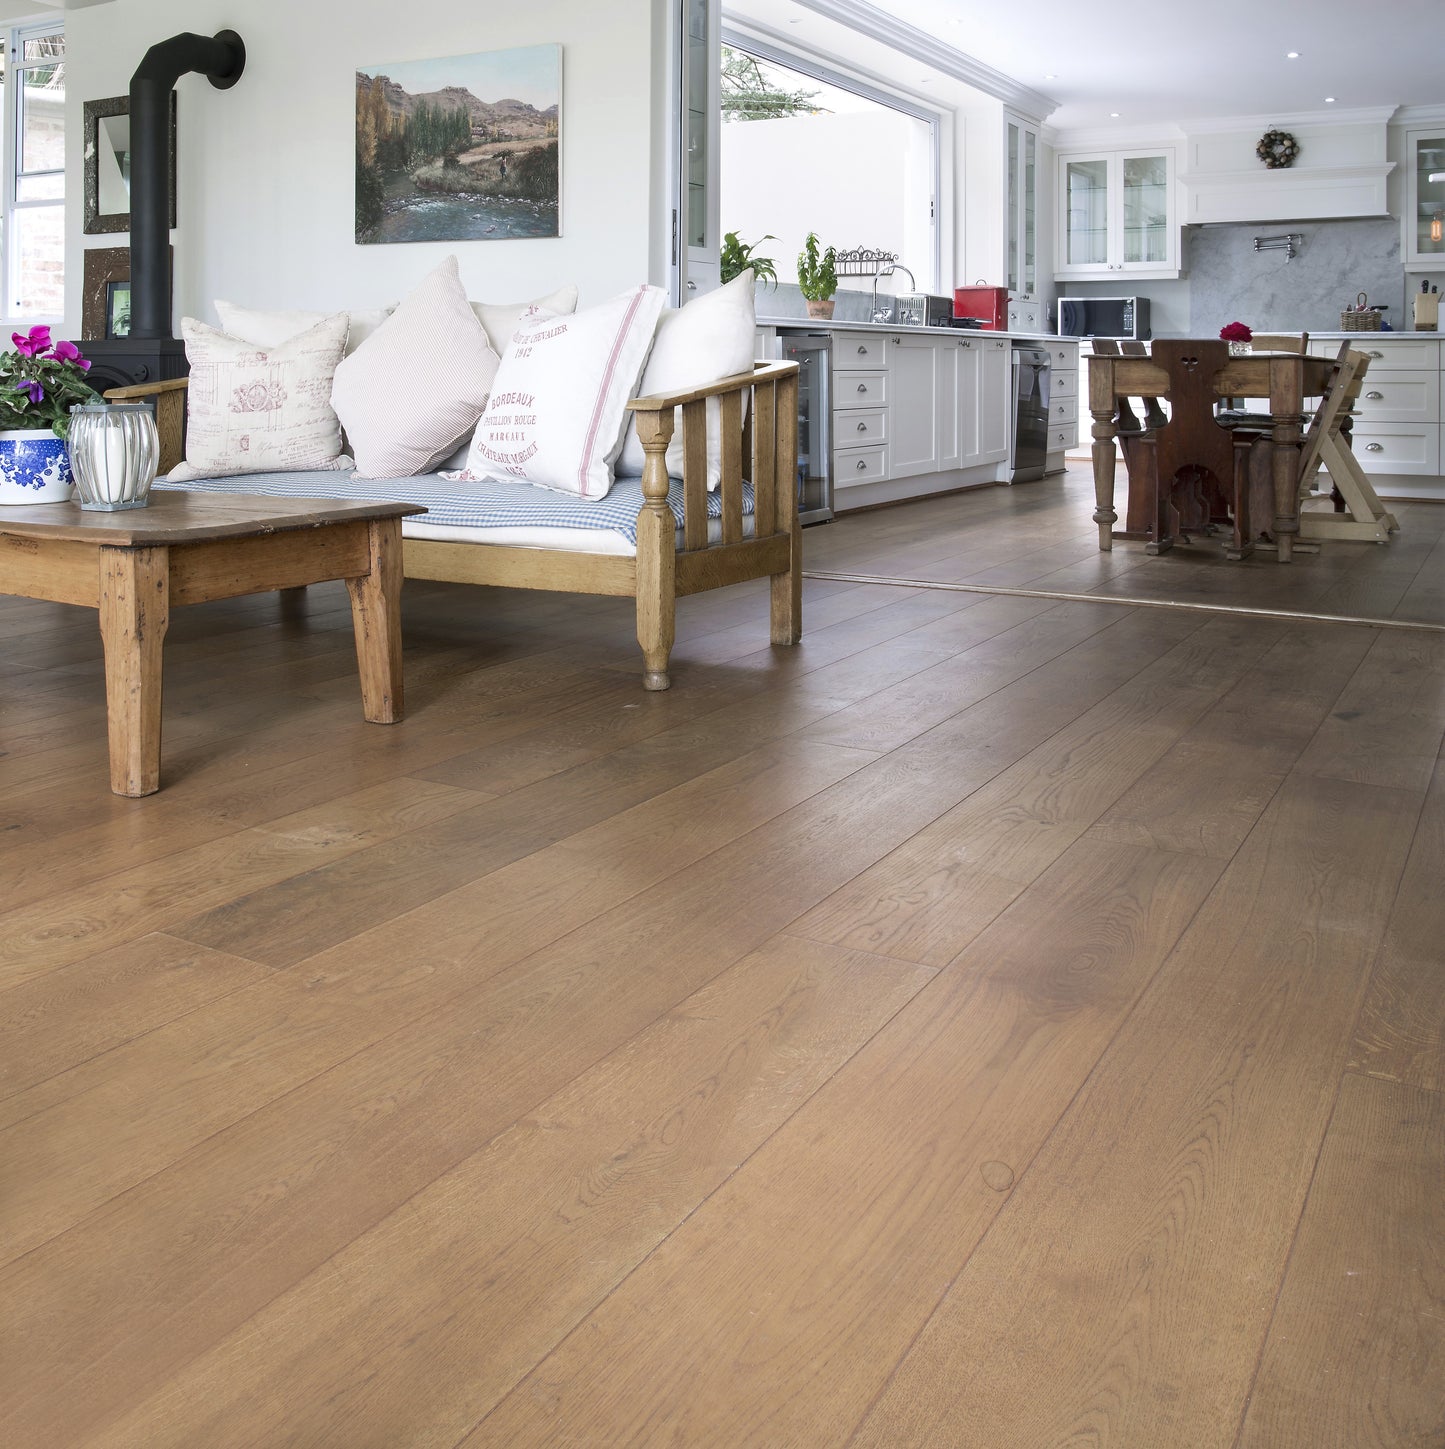 Warm and Rich Engineered oak Flooring finished in Jetsam